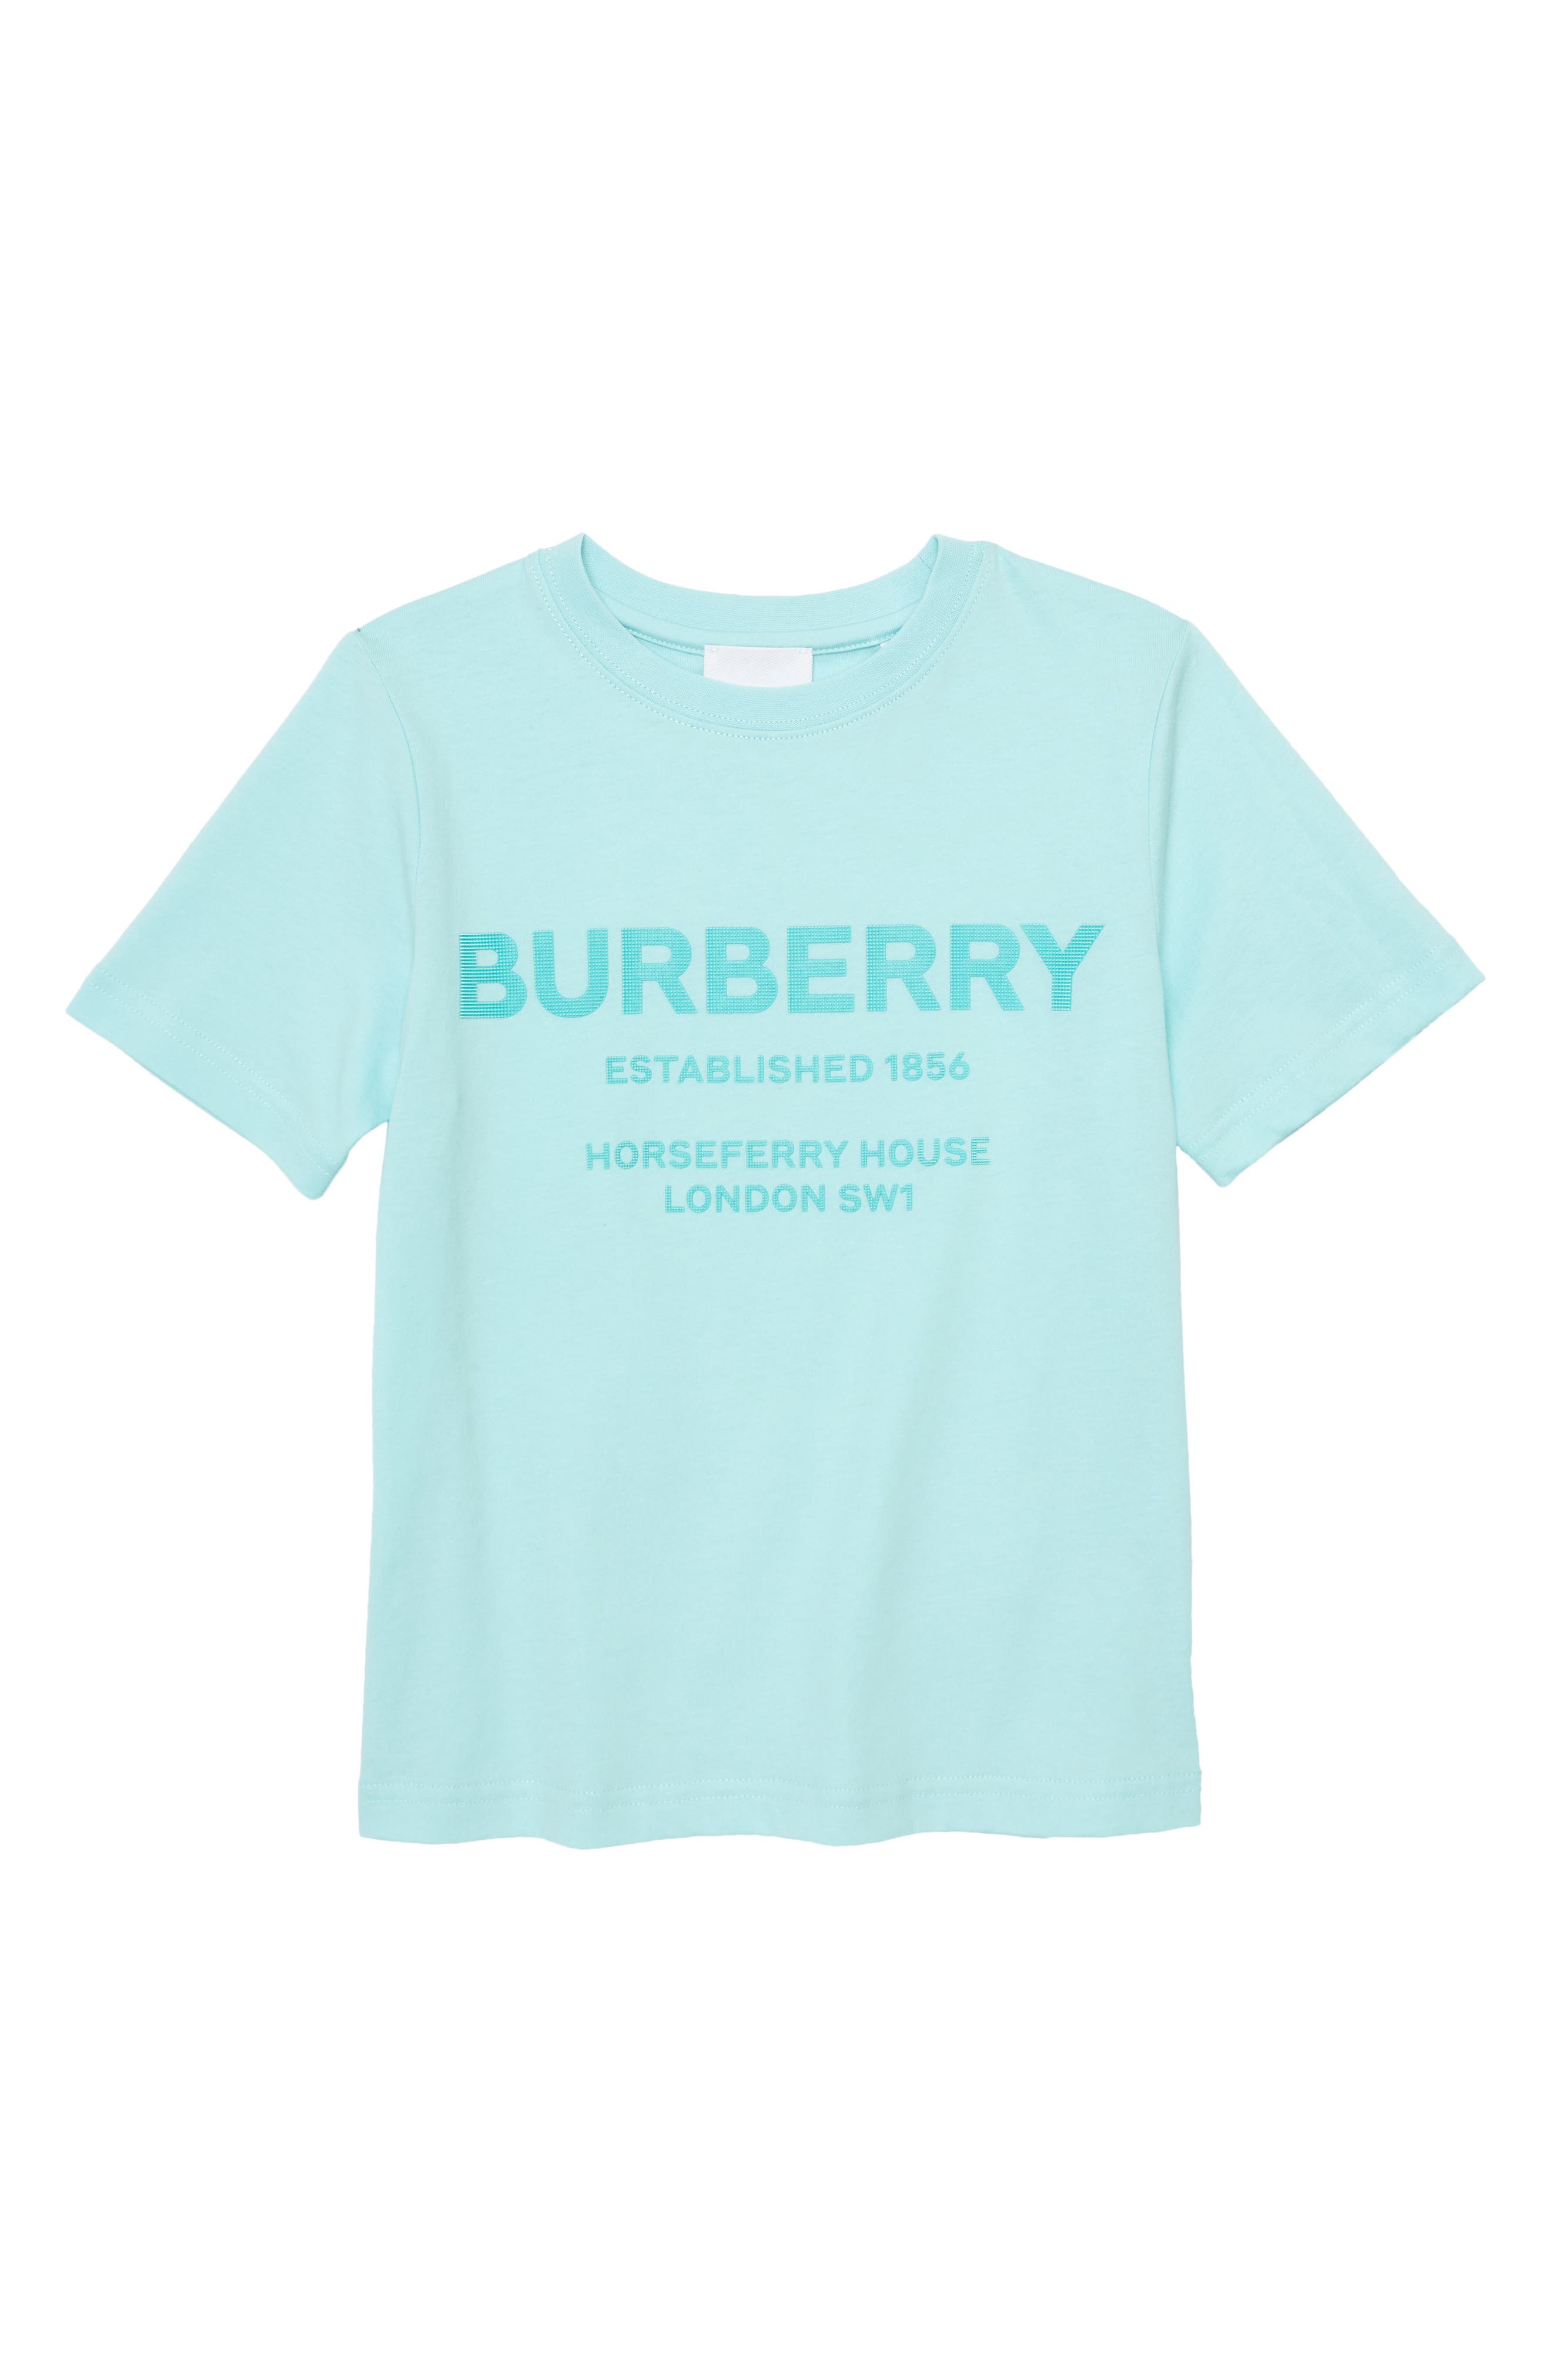 Burberry Kids' Bristle Horseferry Logo Graphic Tee in Light Aqua Blue at Nordstrom, Size 10Y Us